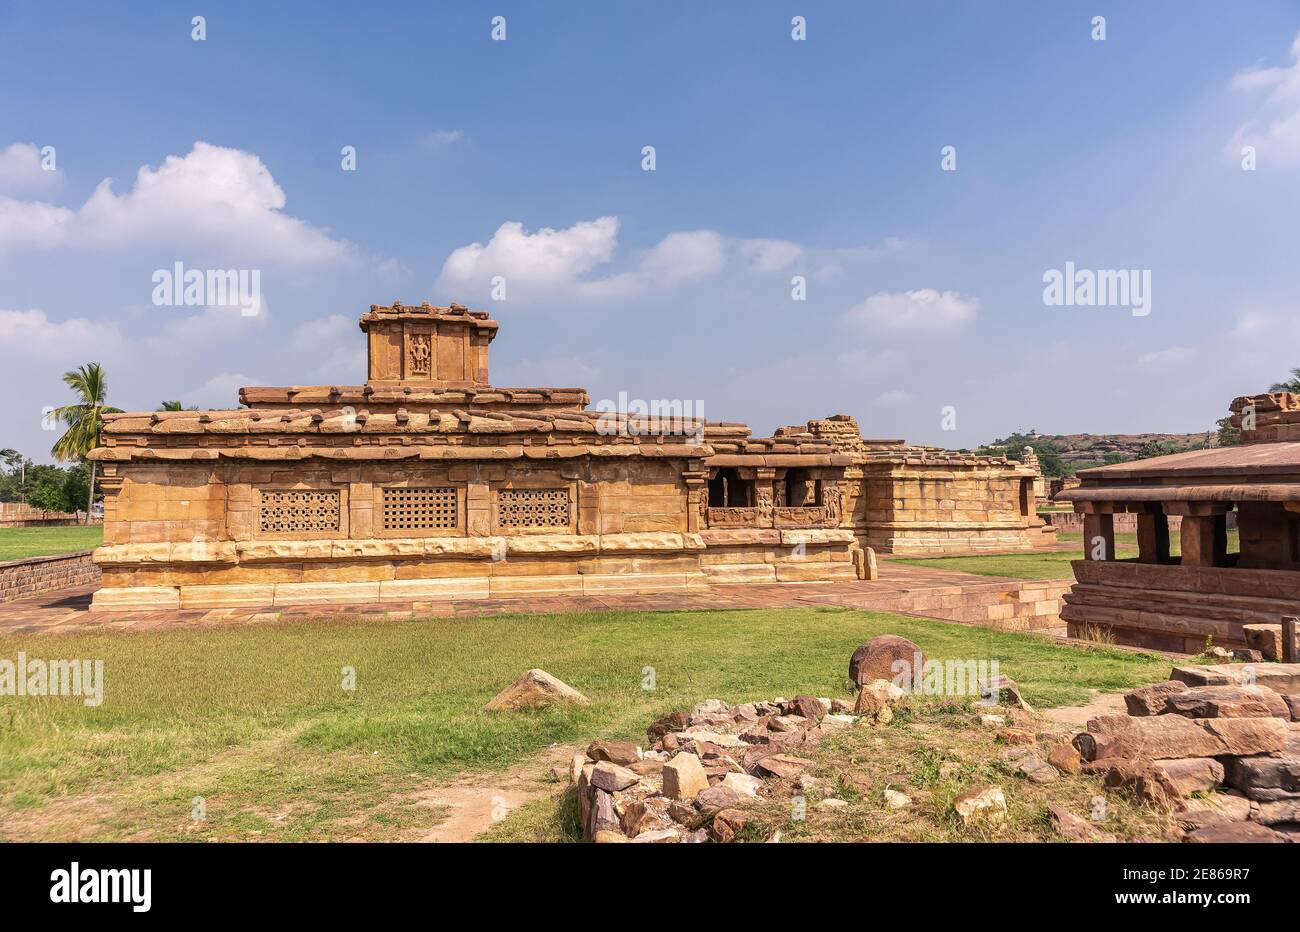 Aihole, Karnataka, India - November 7, 2013: Lad Khan or Chalukya Shiva Temple among other brown stone sanctuary buildings under blue cloudscape and w Stock Photo